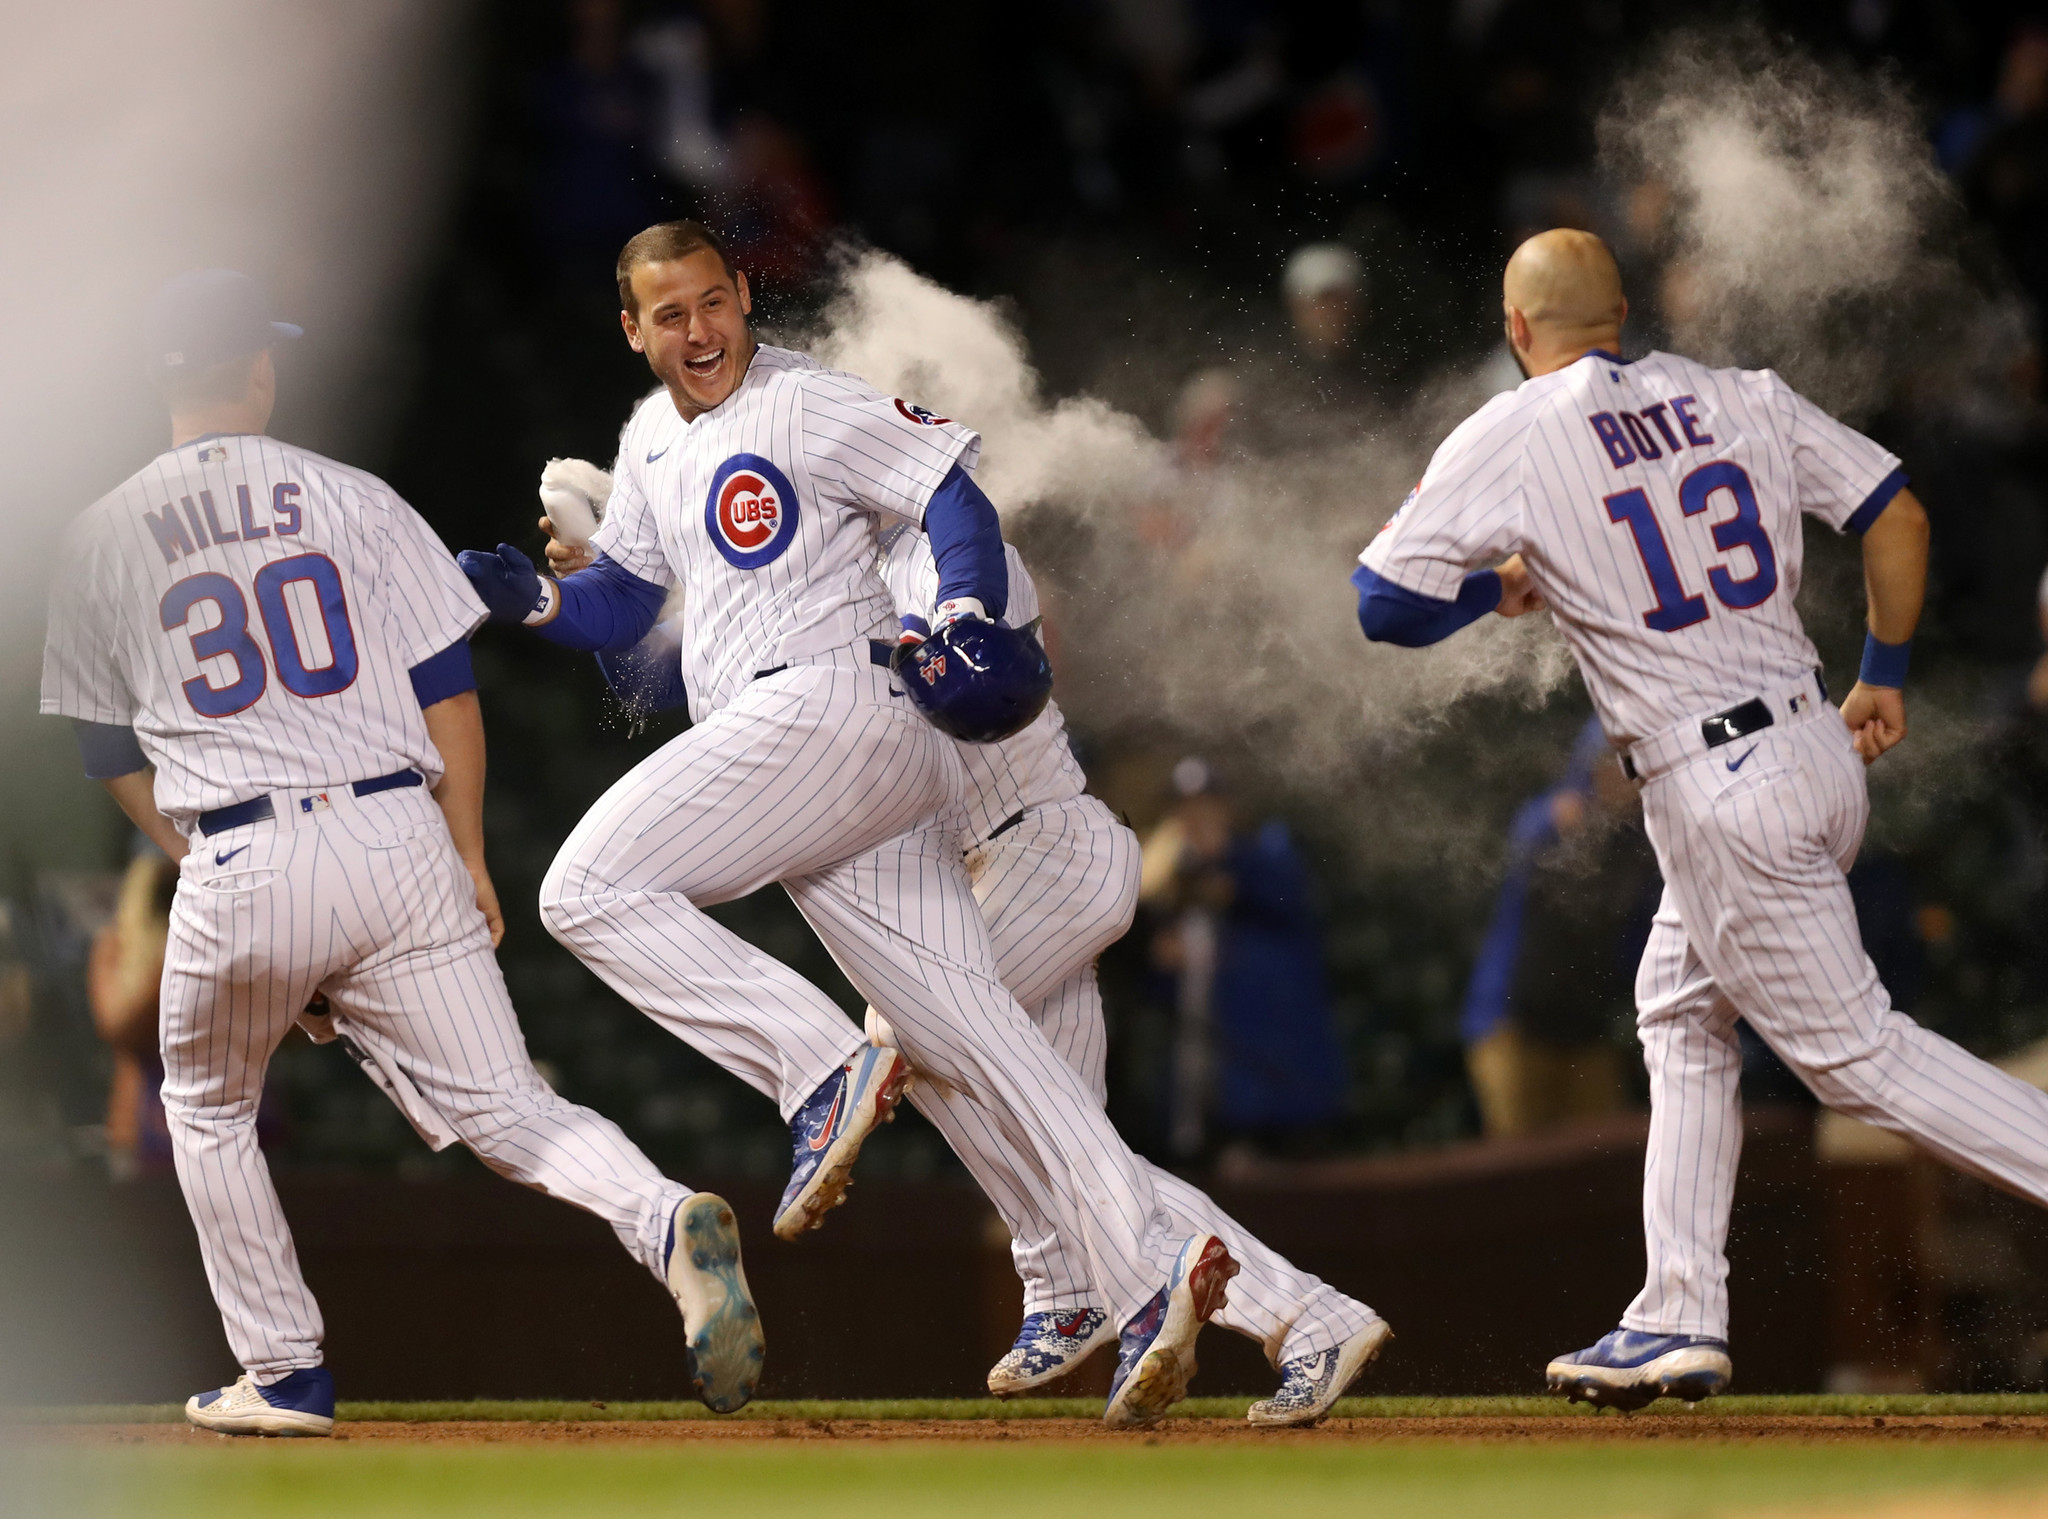 Don't count on a Kris Bryant or Anthony Rizzo Cubs reunion